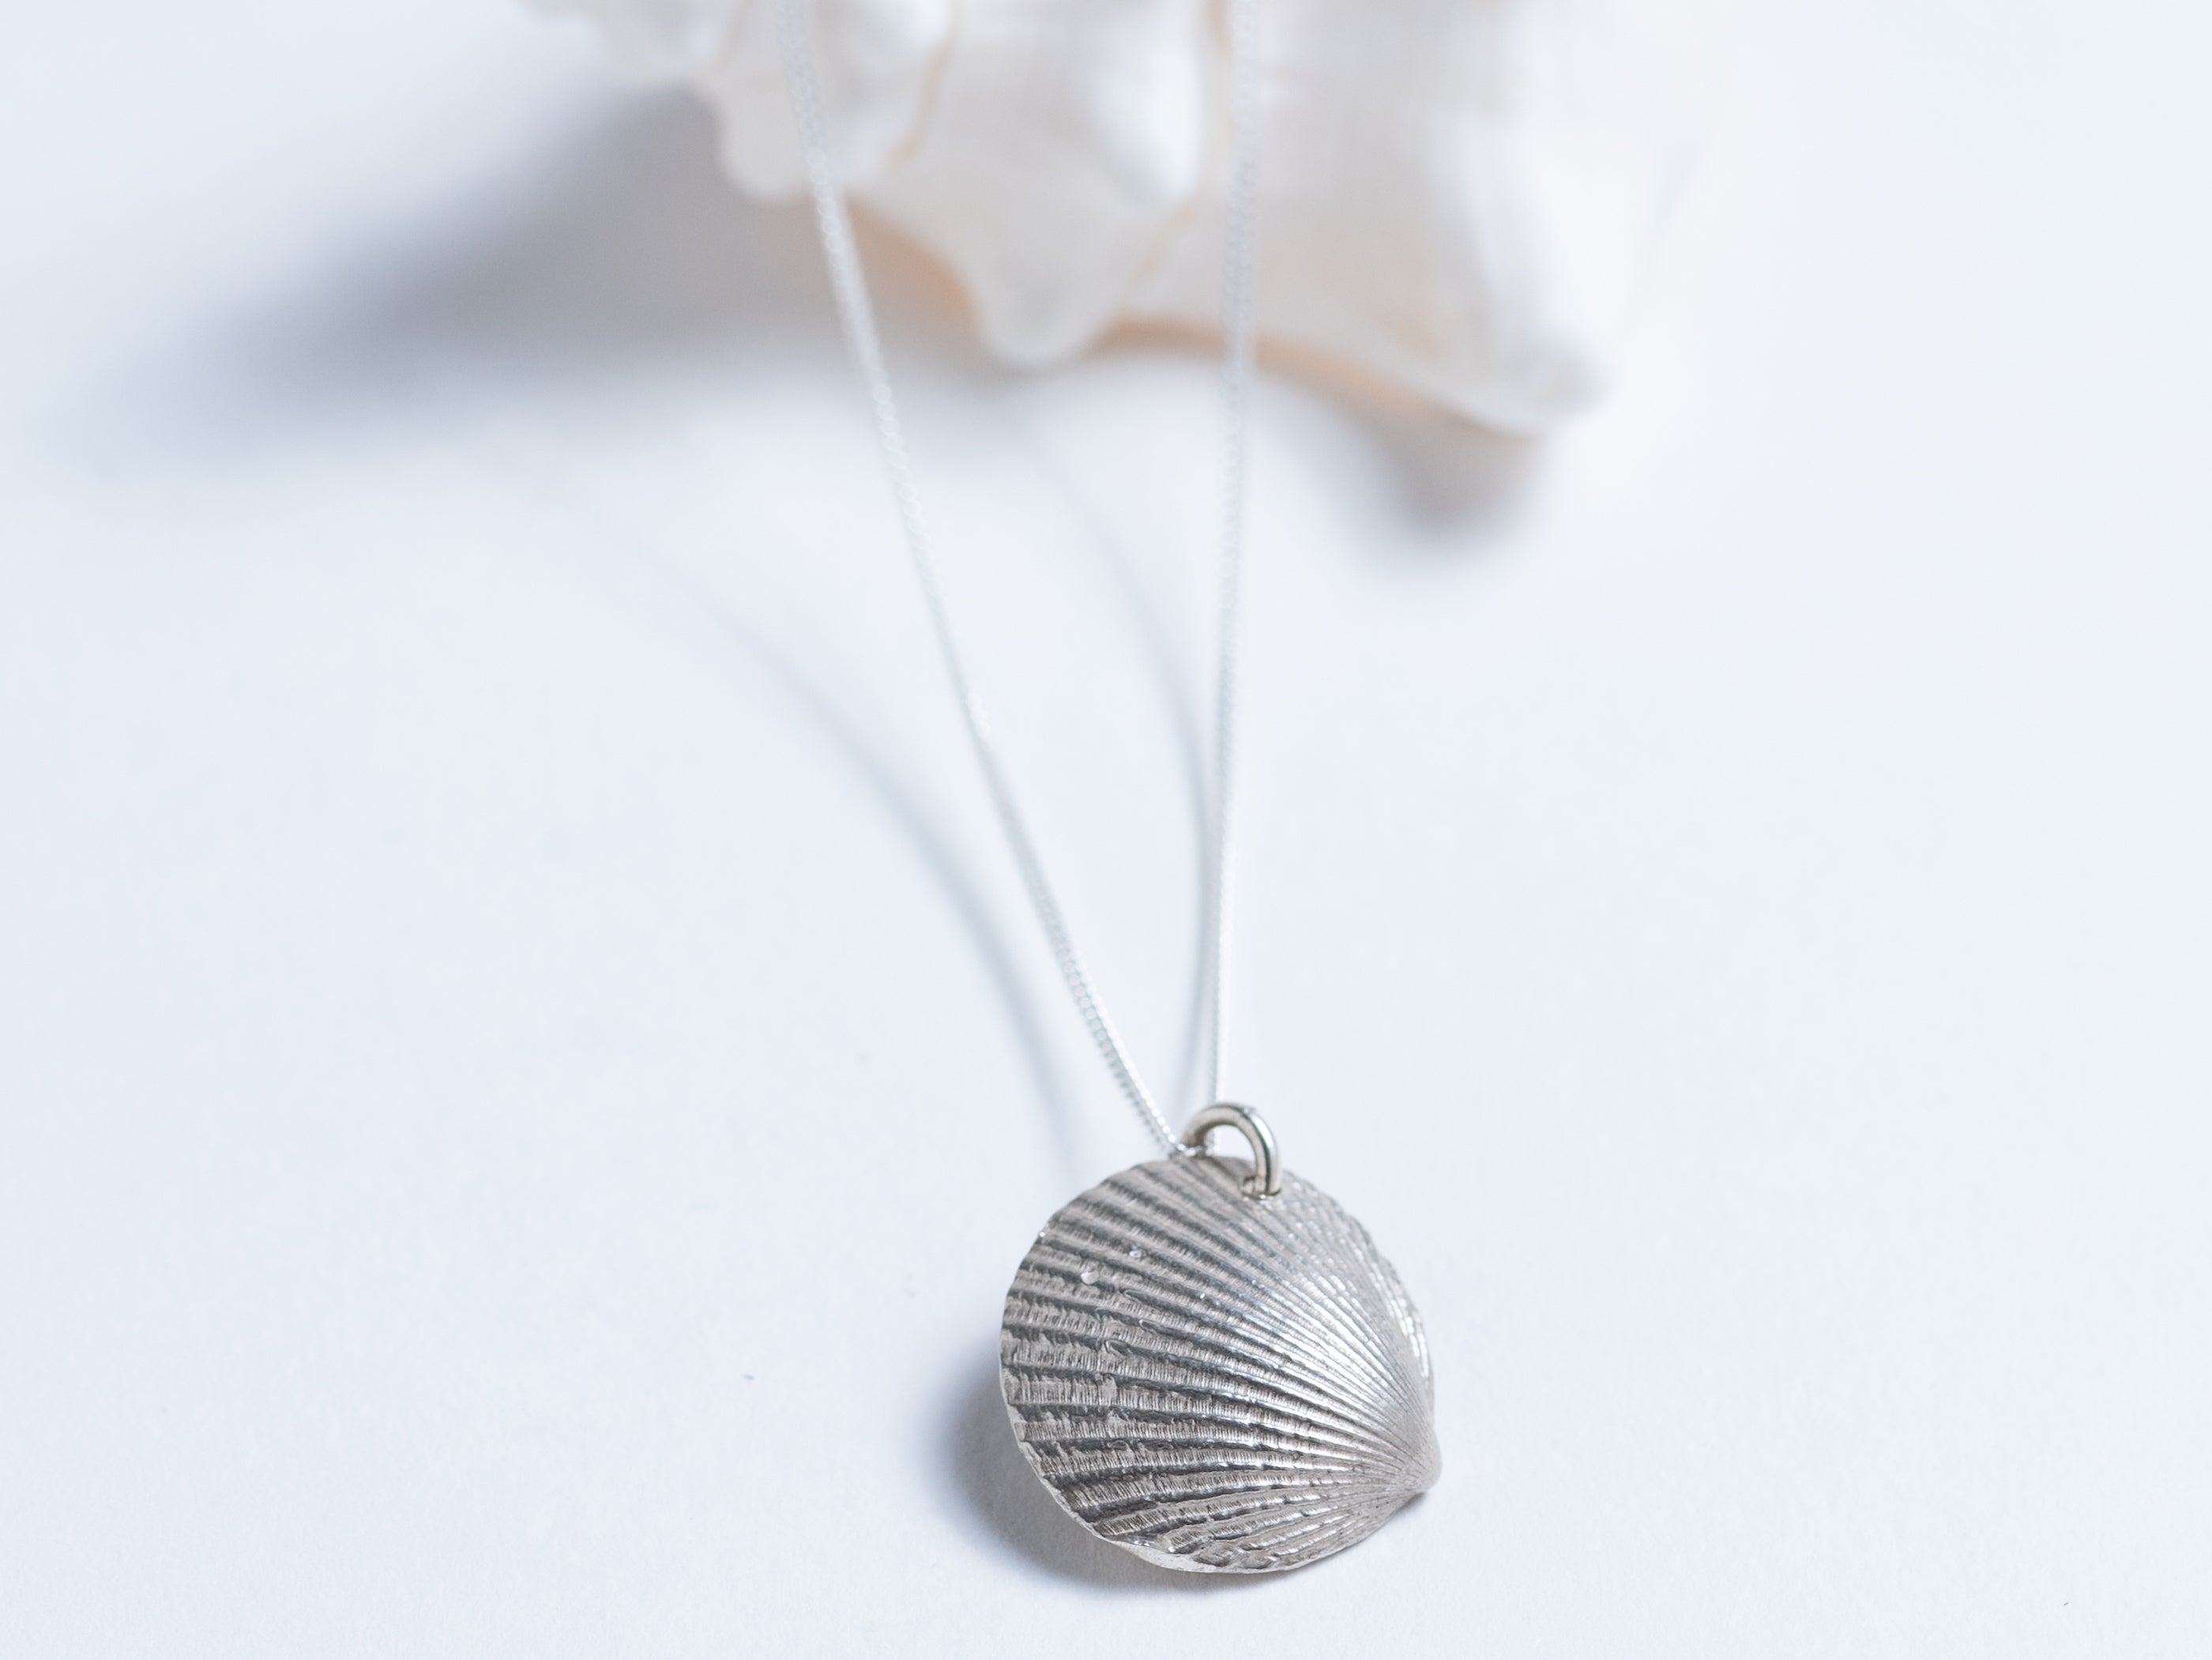 Cast Shell with Pearl Pendant